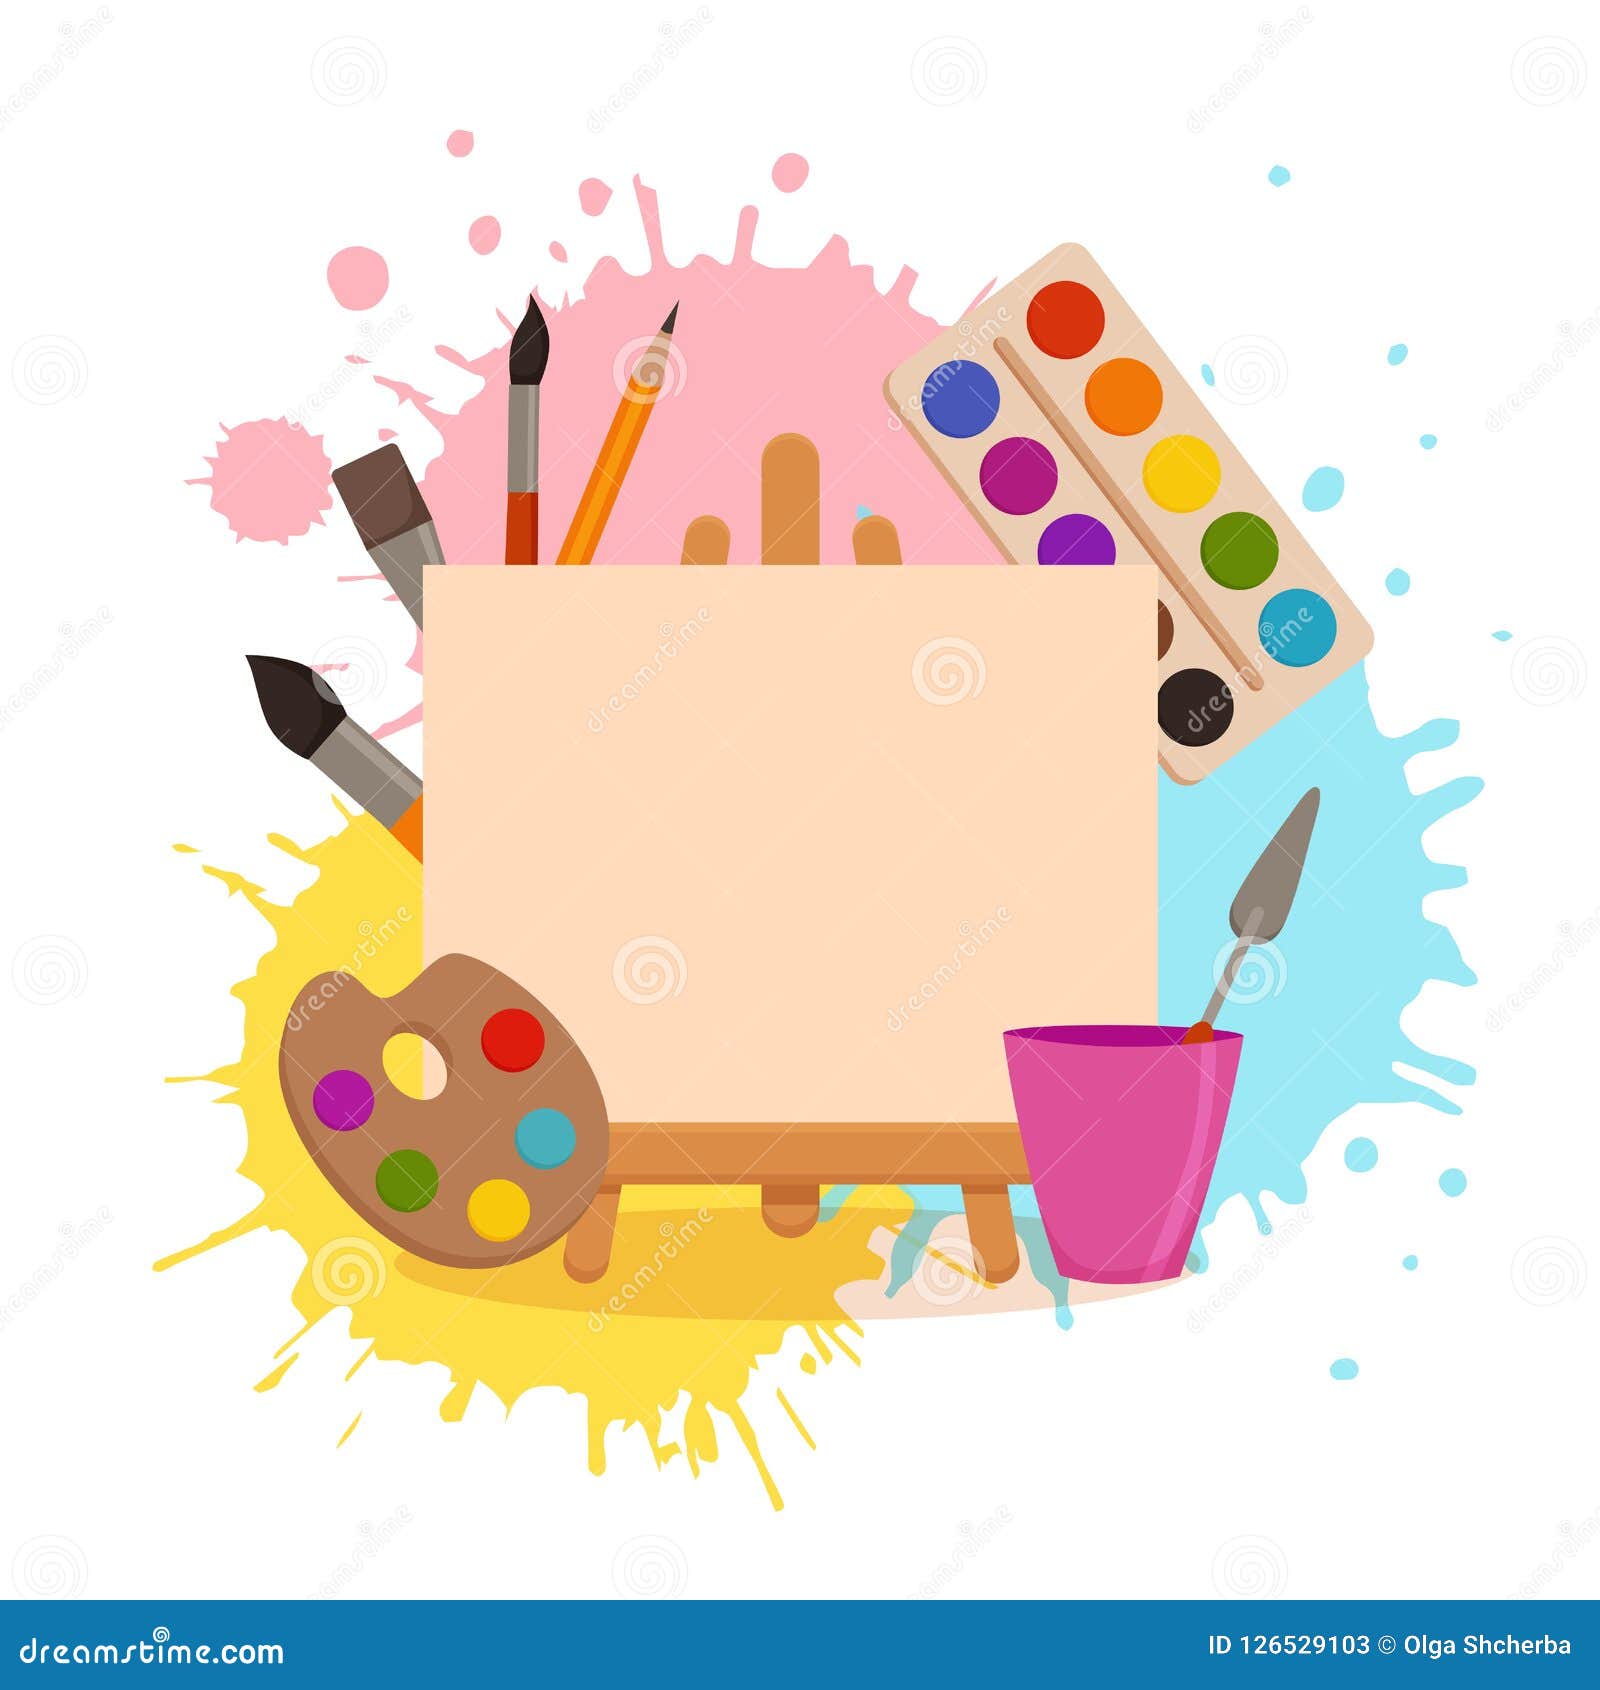 https://thumbs.dreamstime.com/z/painting-tools-elements-cartoon-colorful-vector-concept-art-supplies-easel-canvas-paint-tubes-brushes-watercolor-splash-background-126529103.jpg